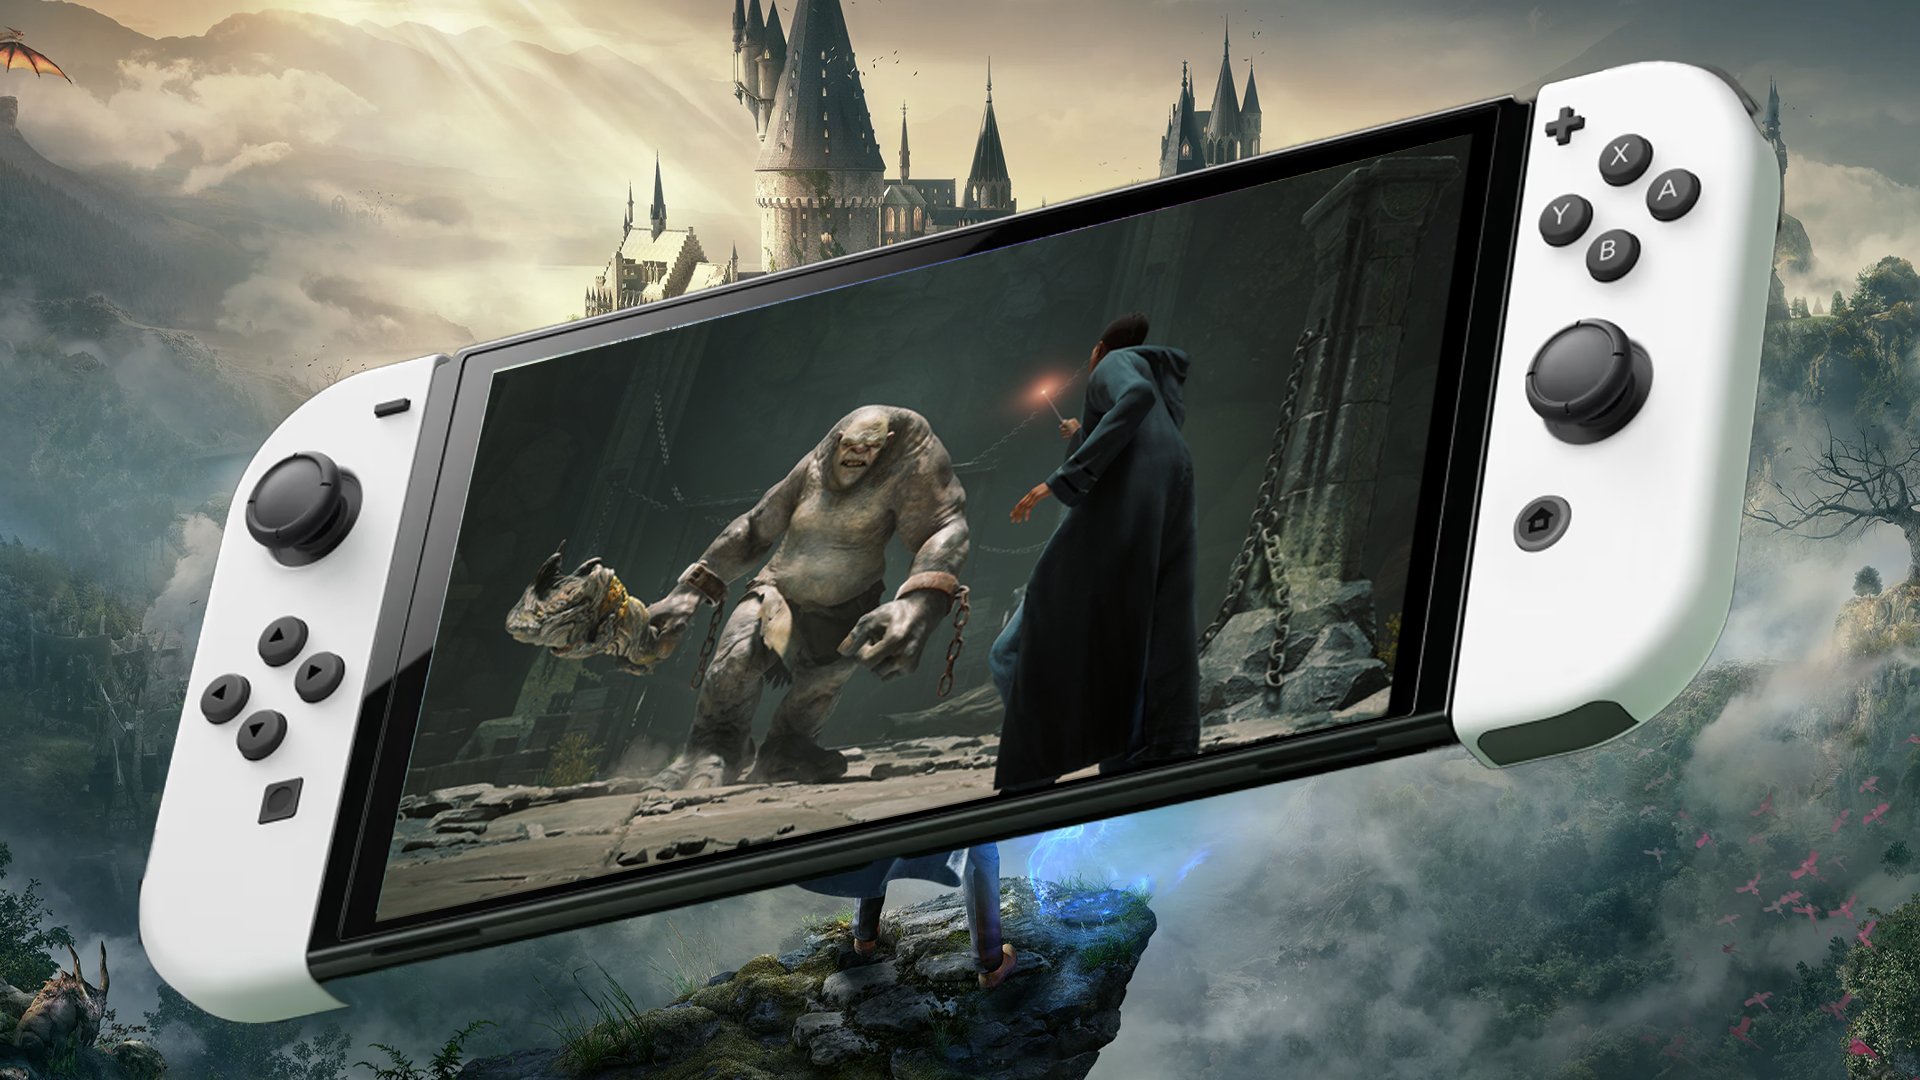 Hogwarts Legacy on Nintendo Switch: gameplay, features What you need to  know about the game 